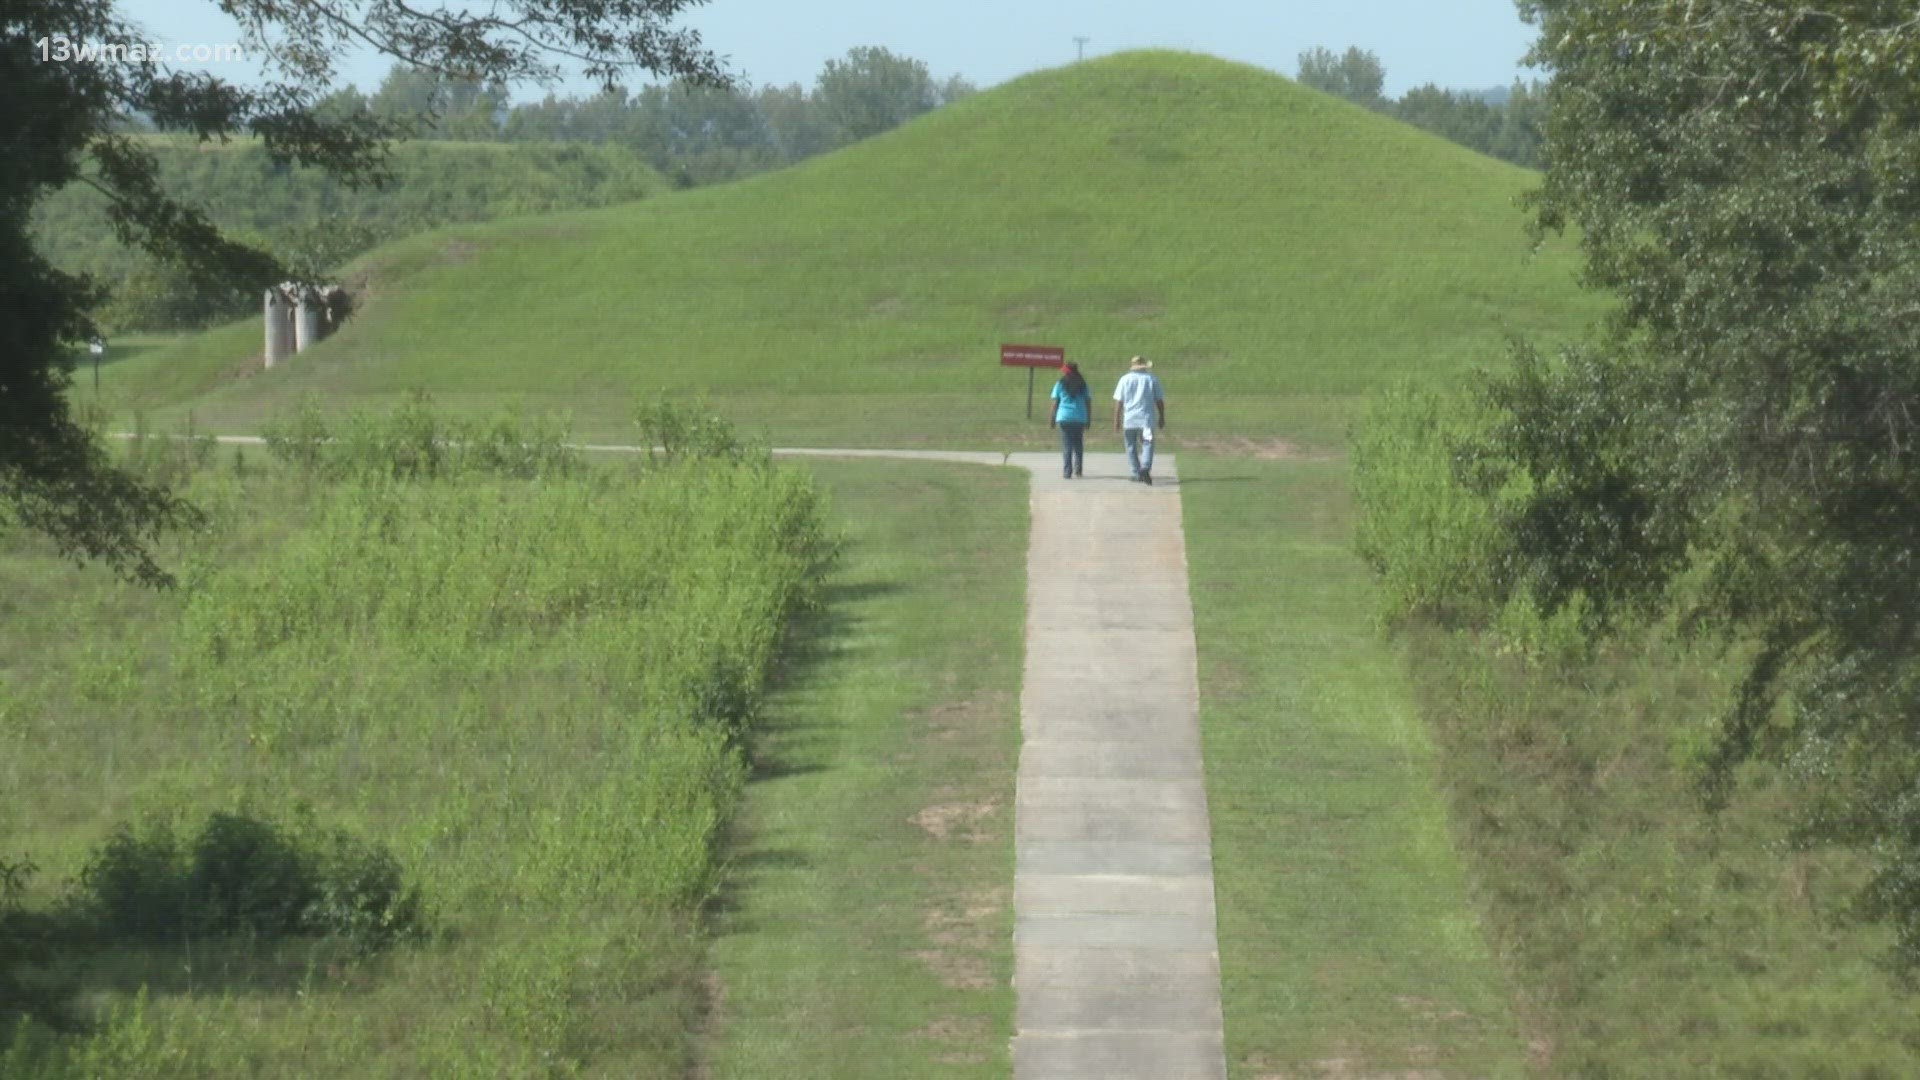 The Ocmulgee Mounds National Historical Park is hosting it's annual indigenous celebration, but there's been changes for this year's festival.